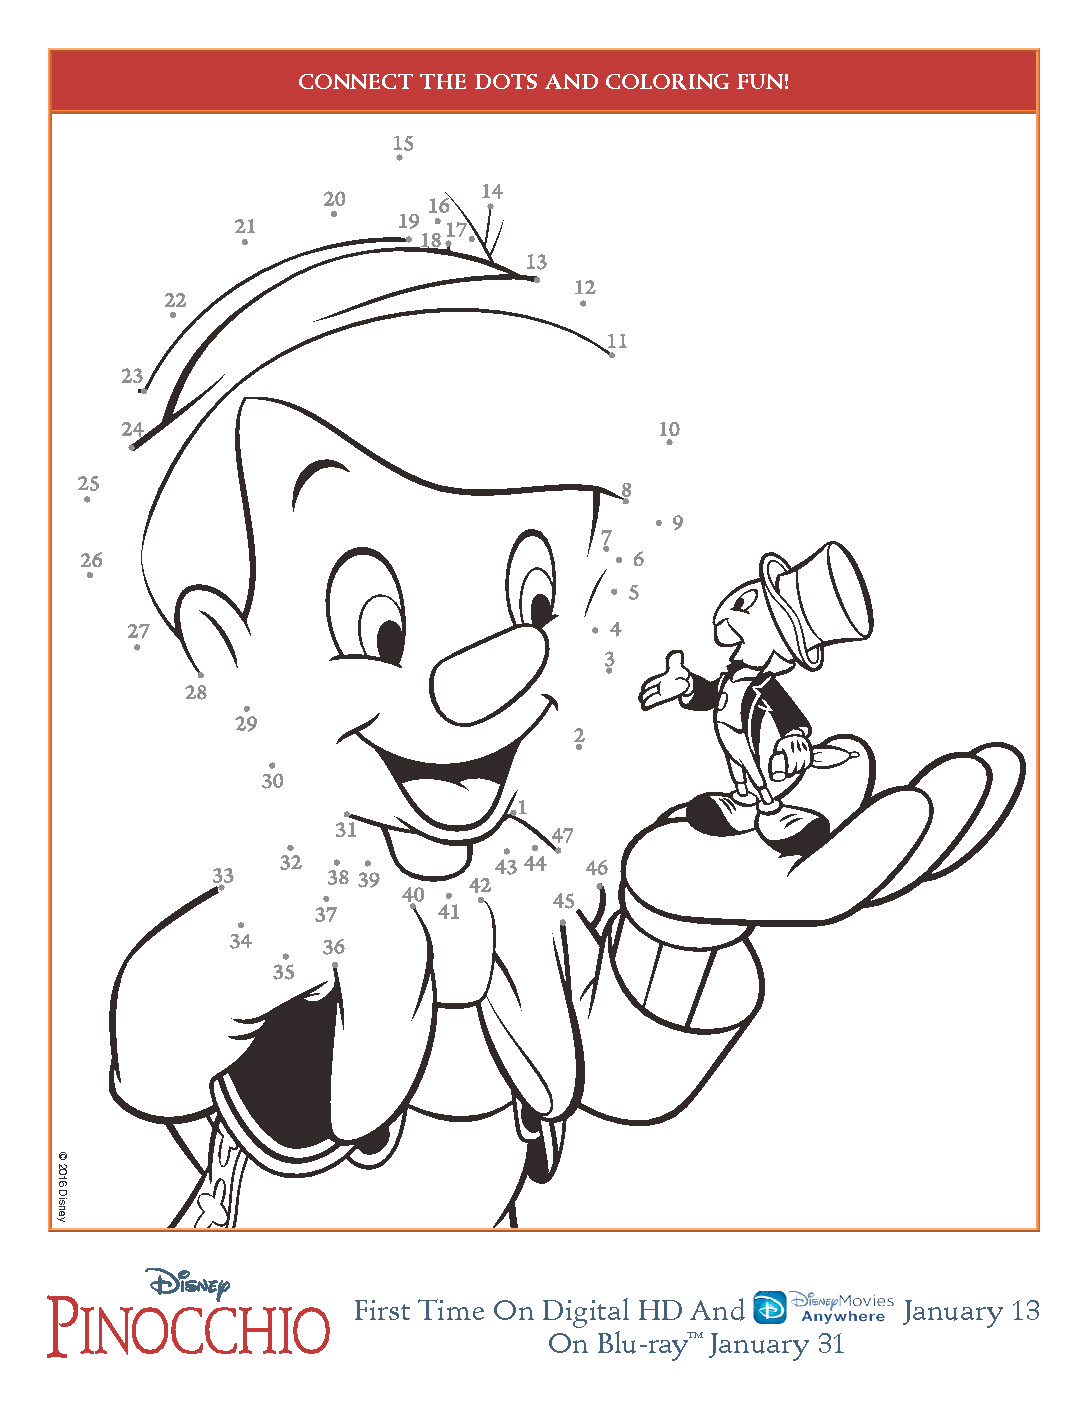 Free Pinocchio Activity Sheets Connect The Dots; Pinocchio Party; Disney Pinocchio coloring pages